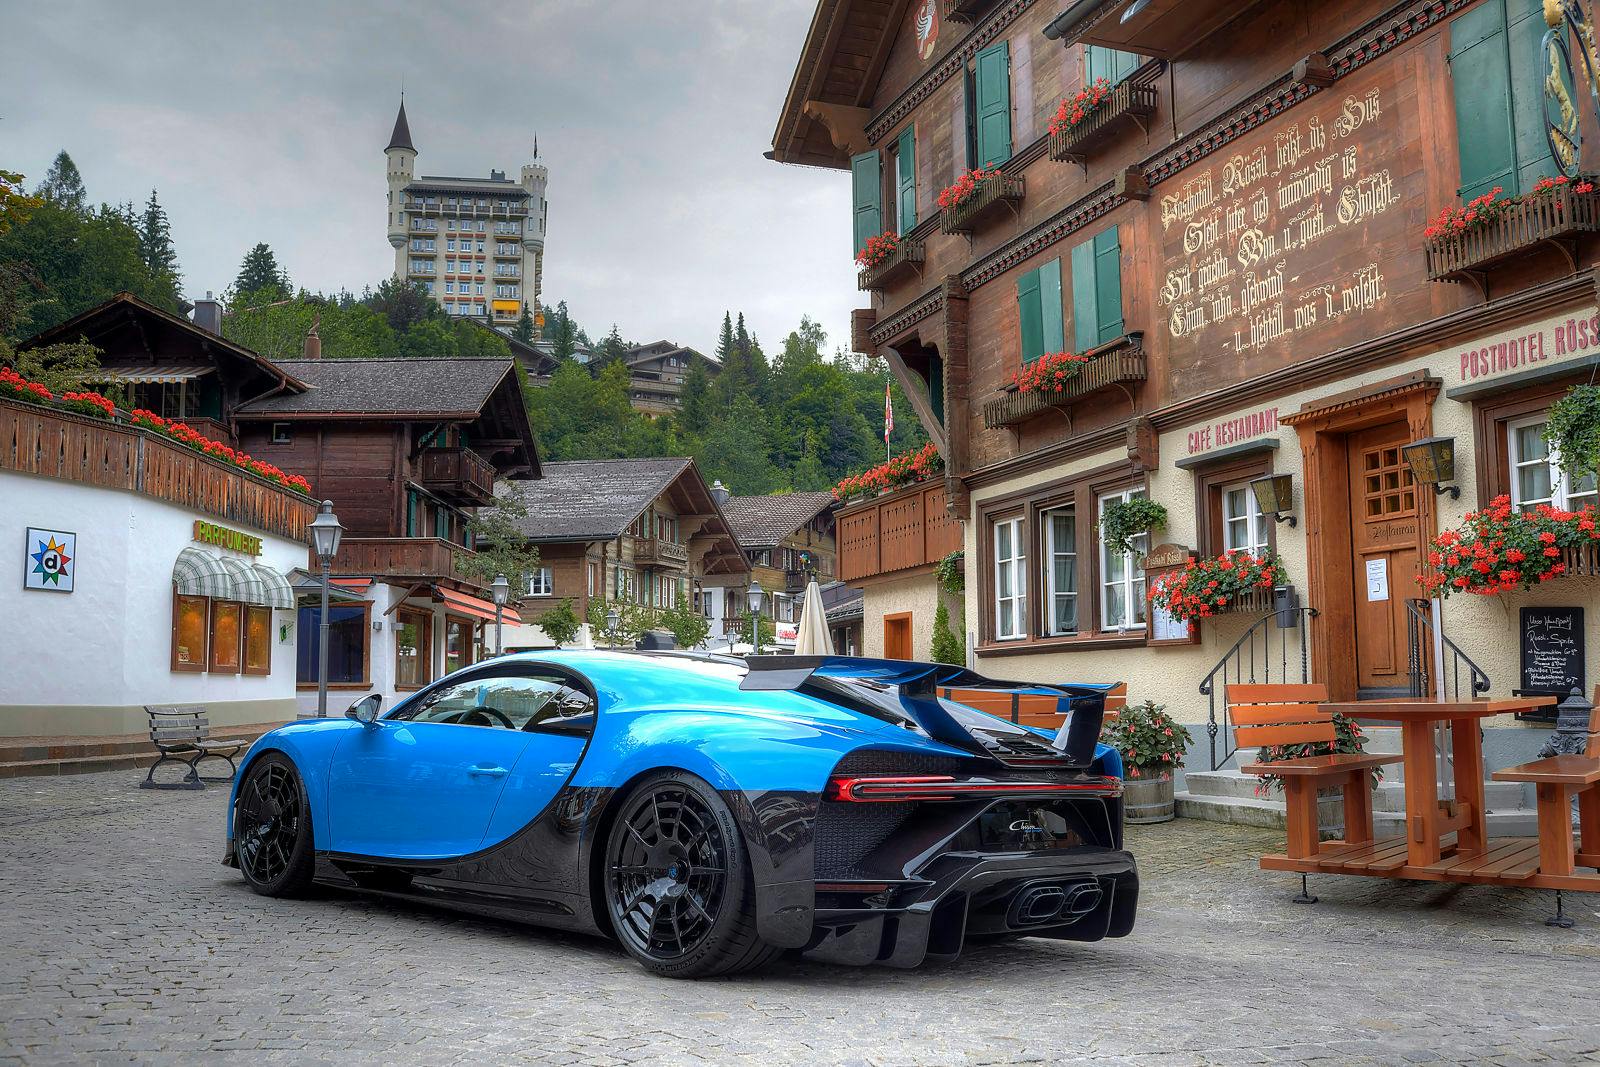 The new Chiron Pur Sport in Gstaad, Switzerland.